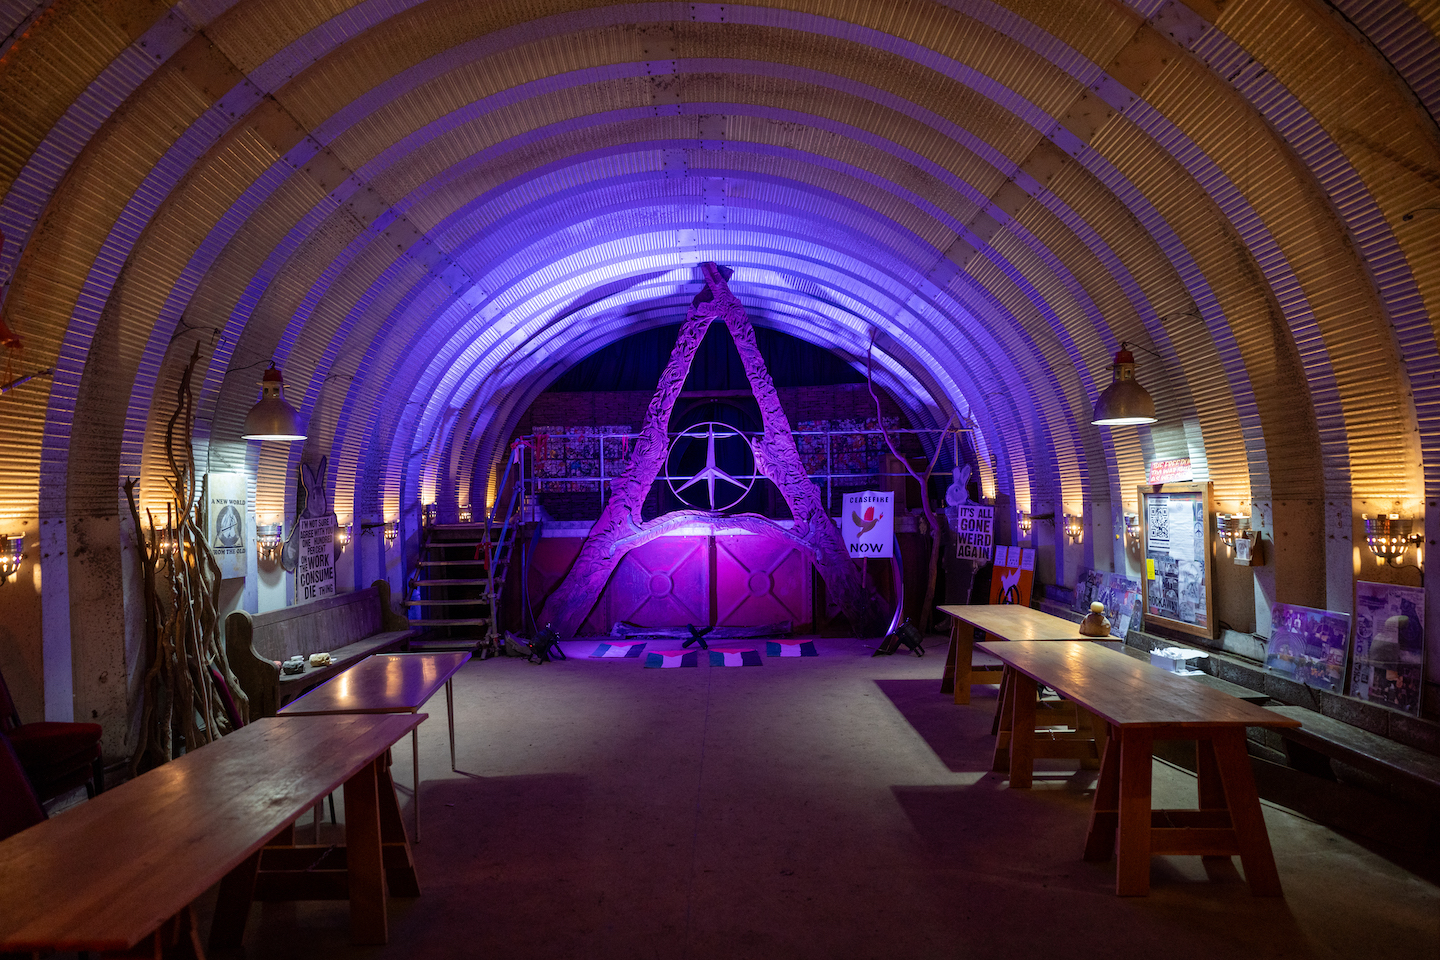 A photo of a DIY chapel lit by purple lighting and with a gigantic A at the altar.